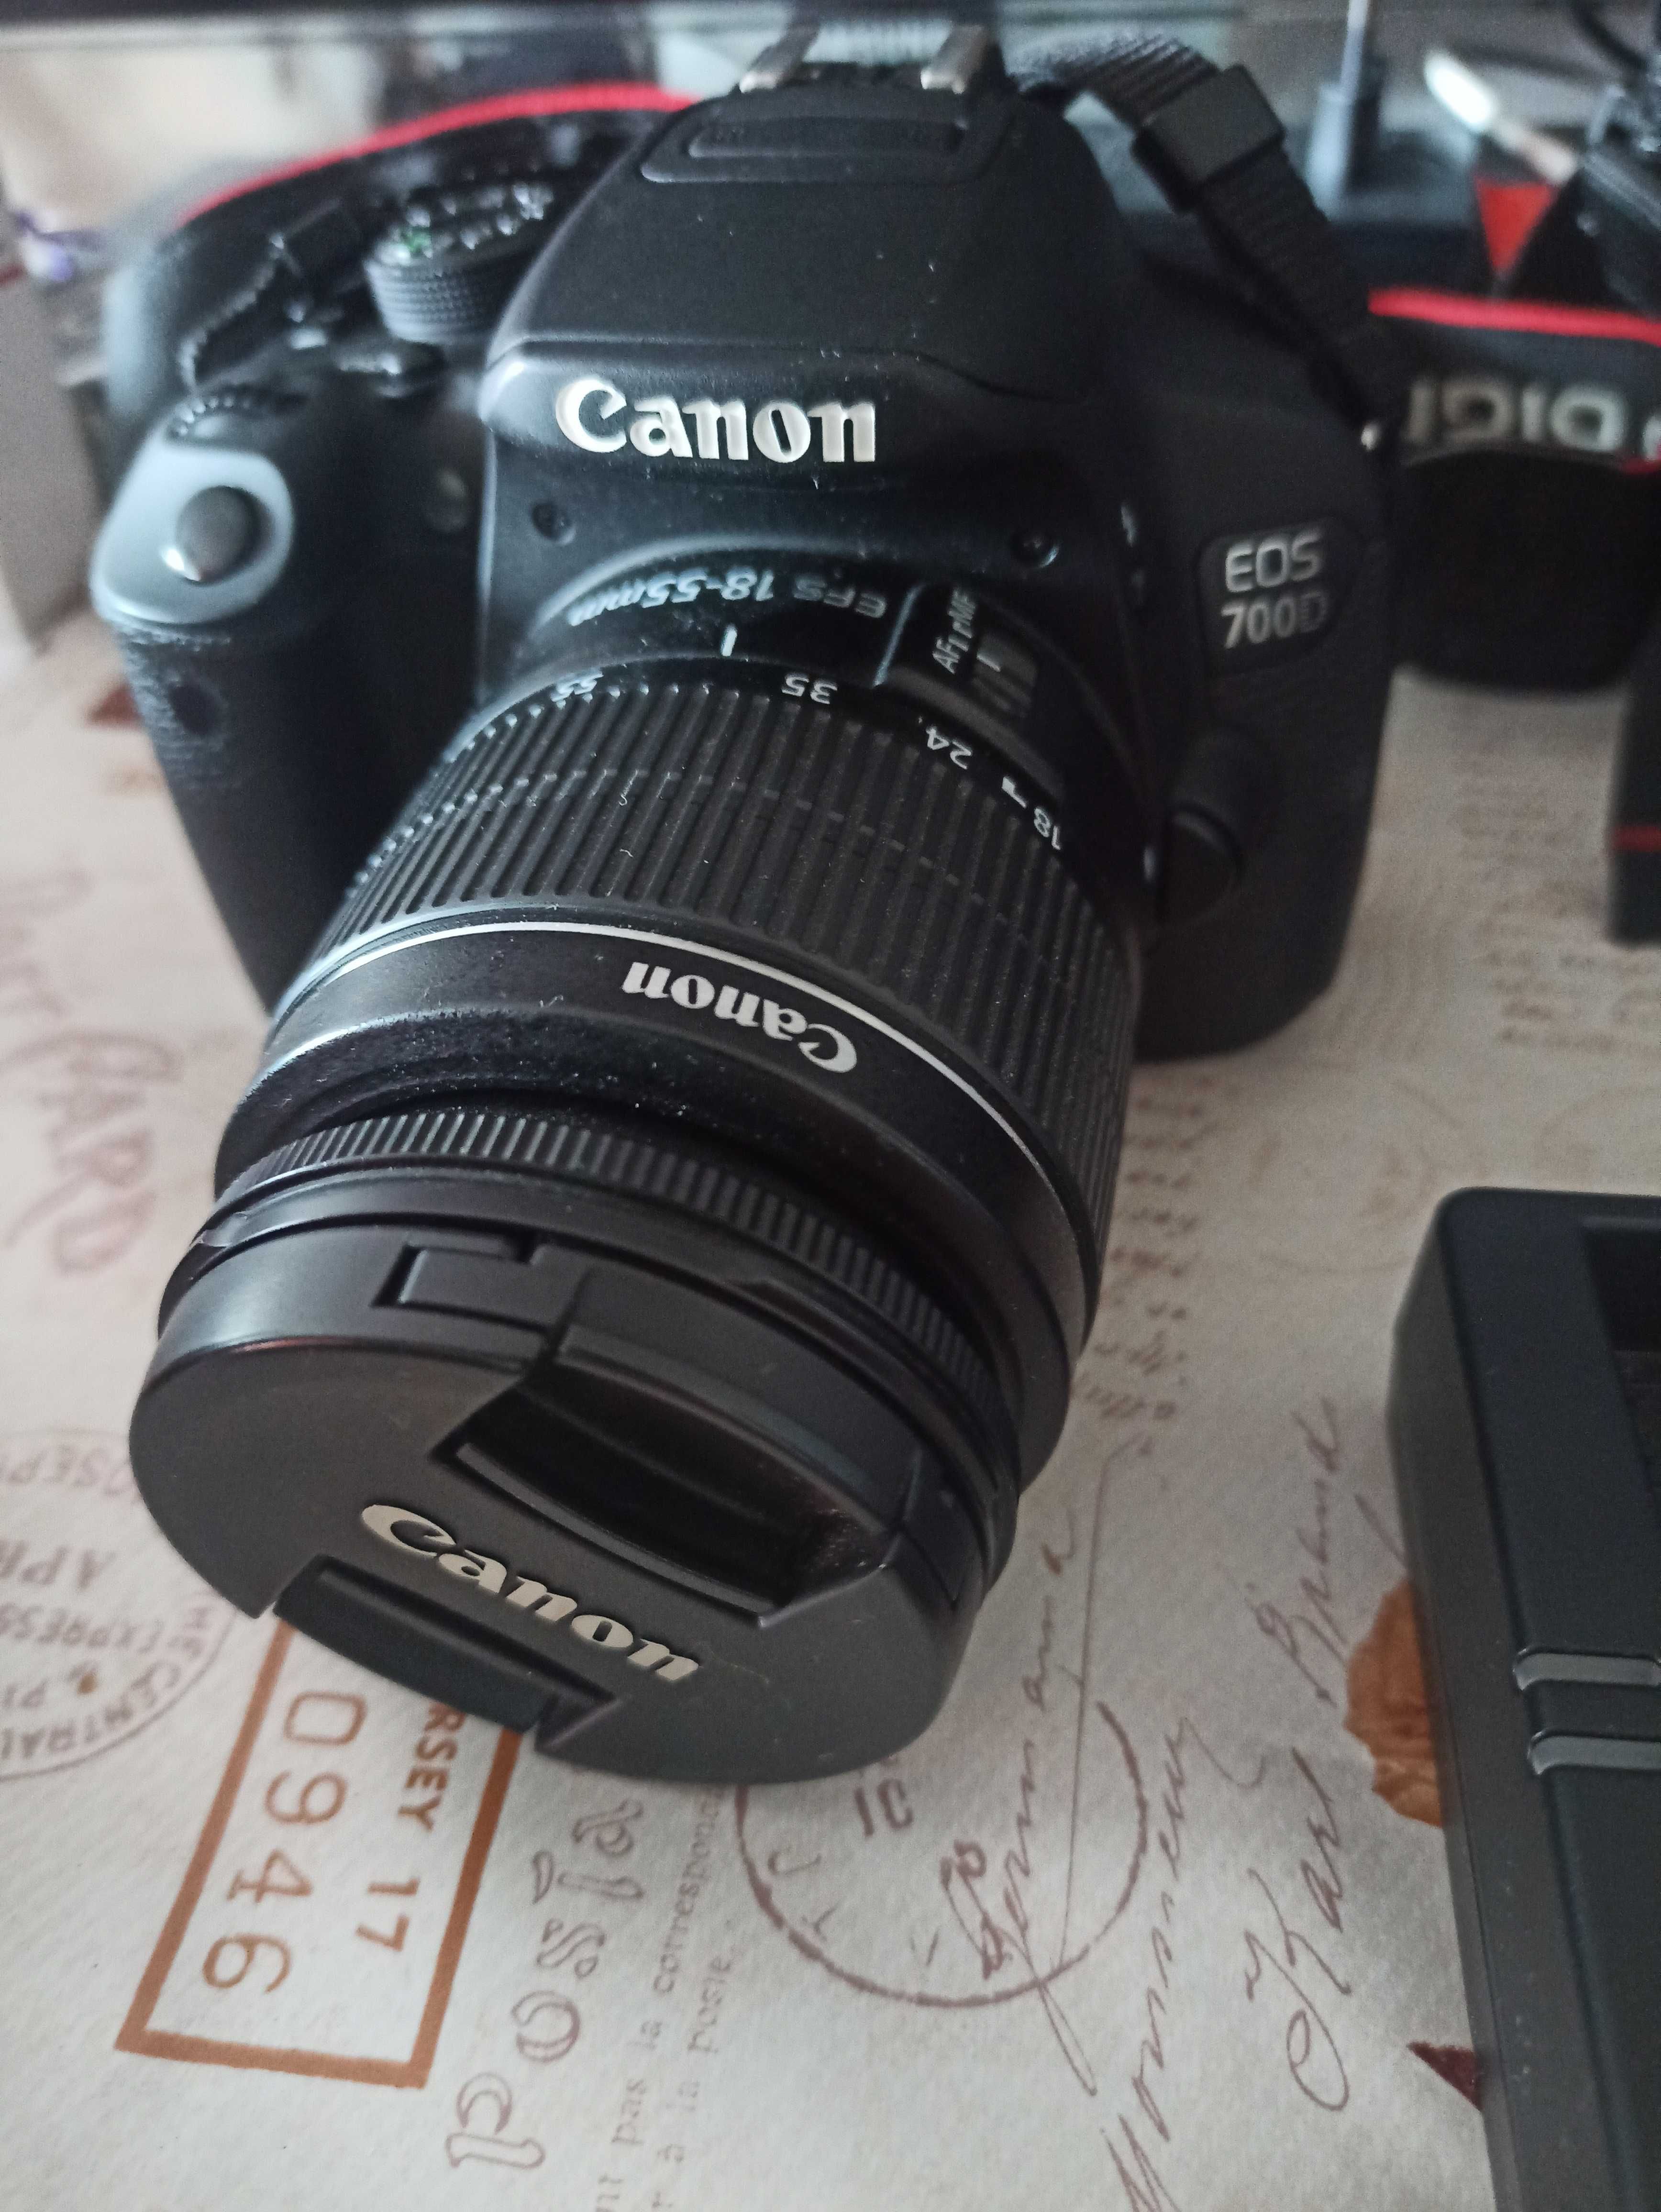 Canon EOS 700D with EFS 18-55mm lens